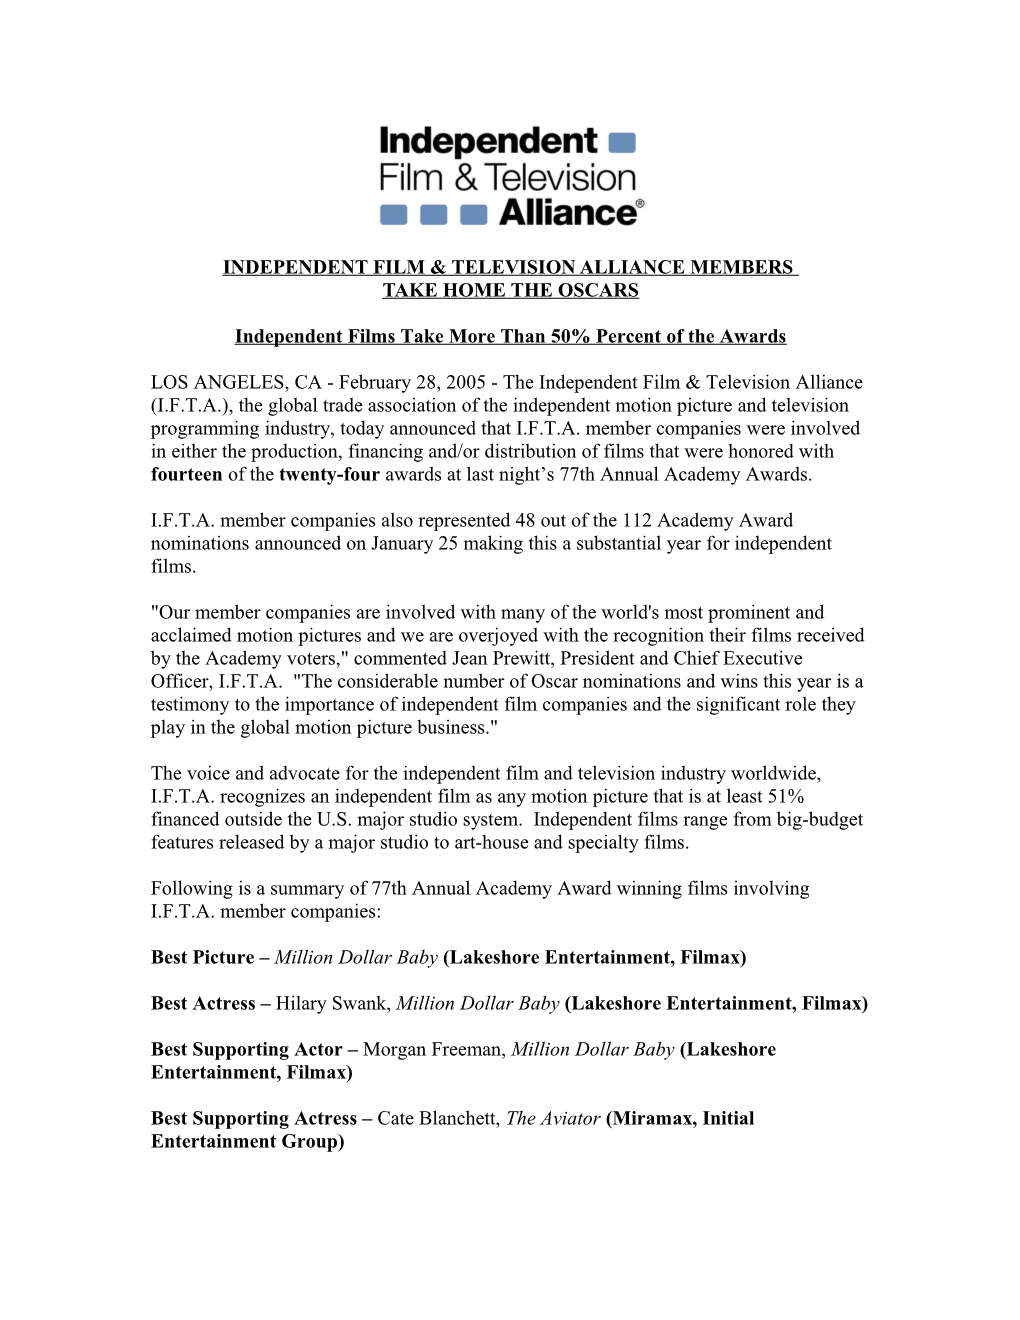 Independent Film & Television Alliance Members